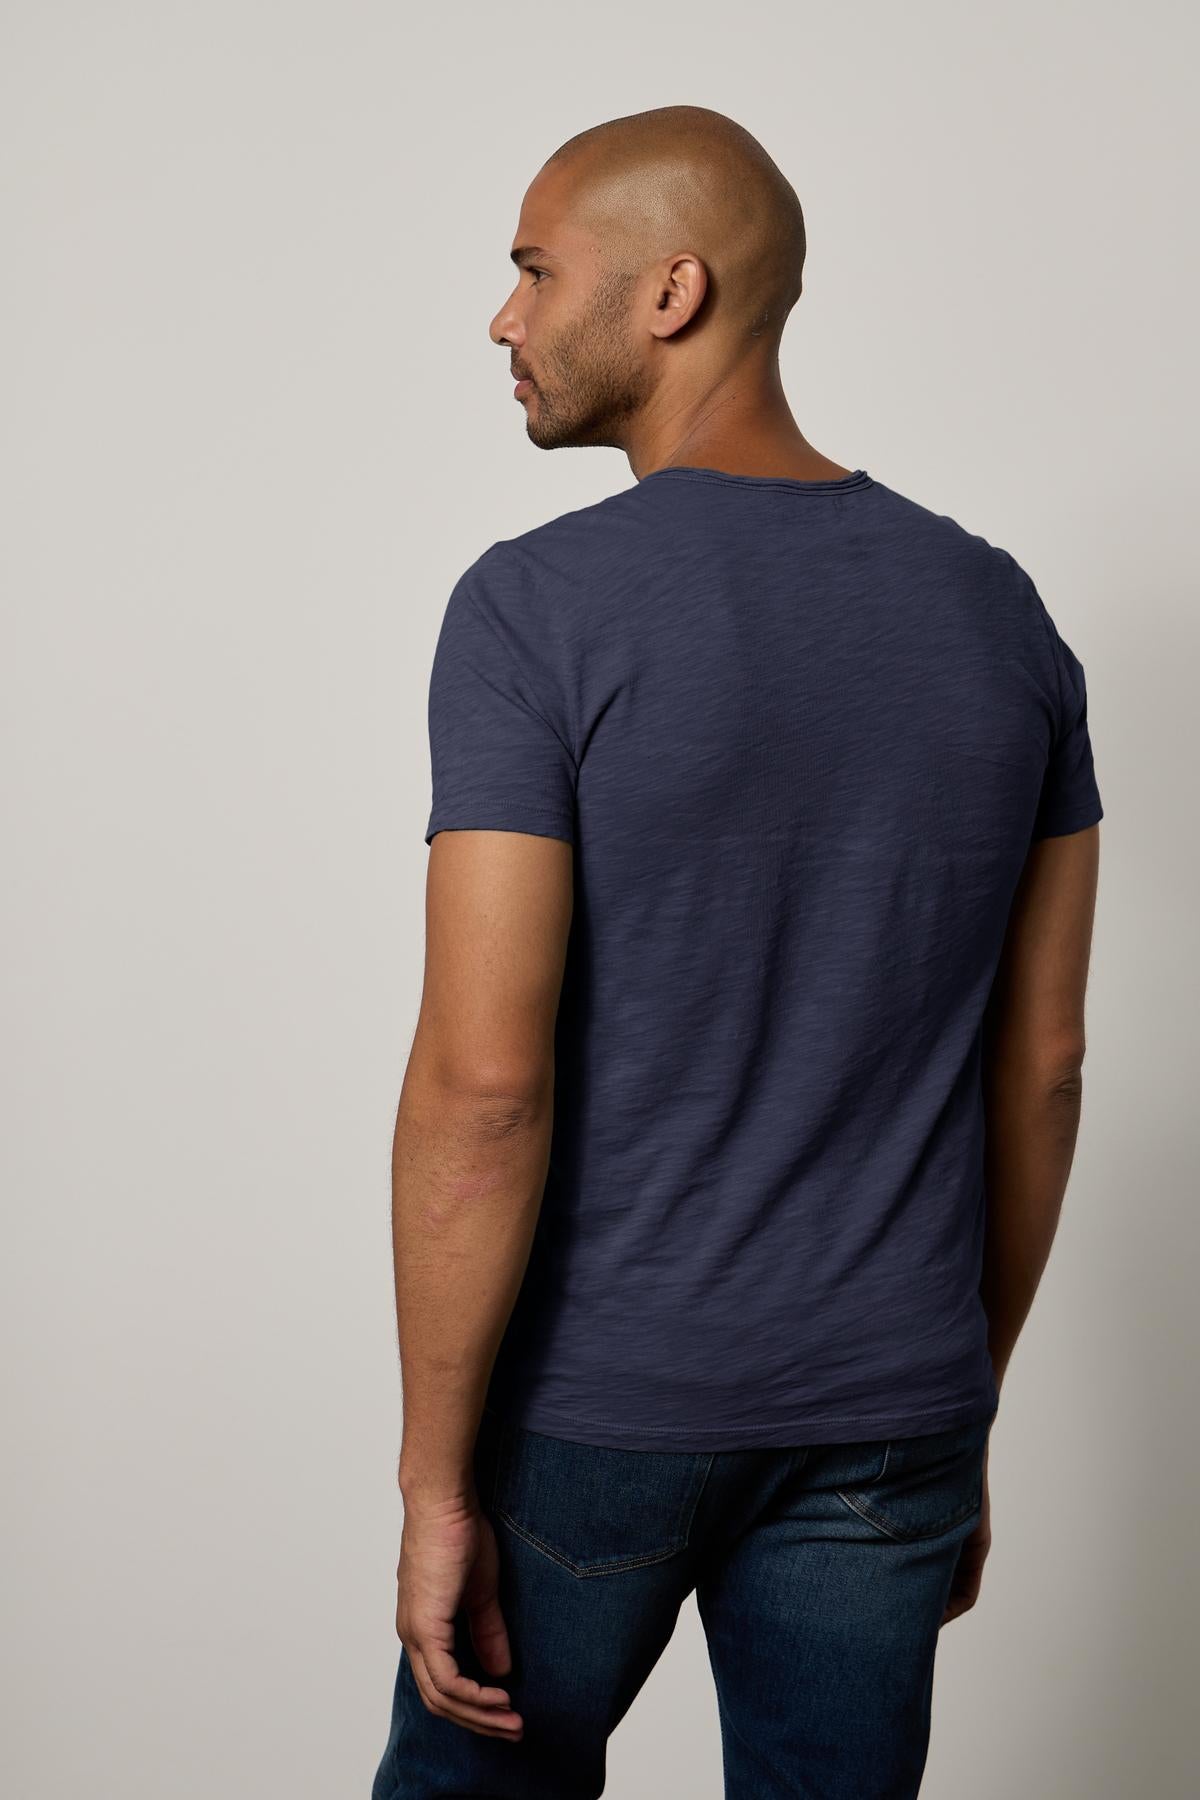 A bald man in a CHAD TEE from Velvet by Graham & Spencer with raw-edge details and jeans stands turned to the side against a neutral background.-26146501296321